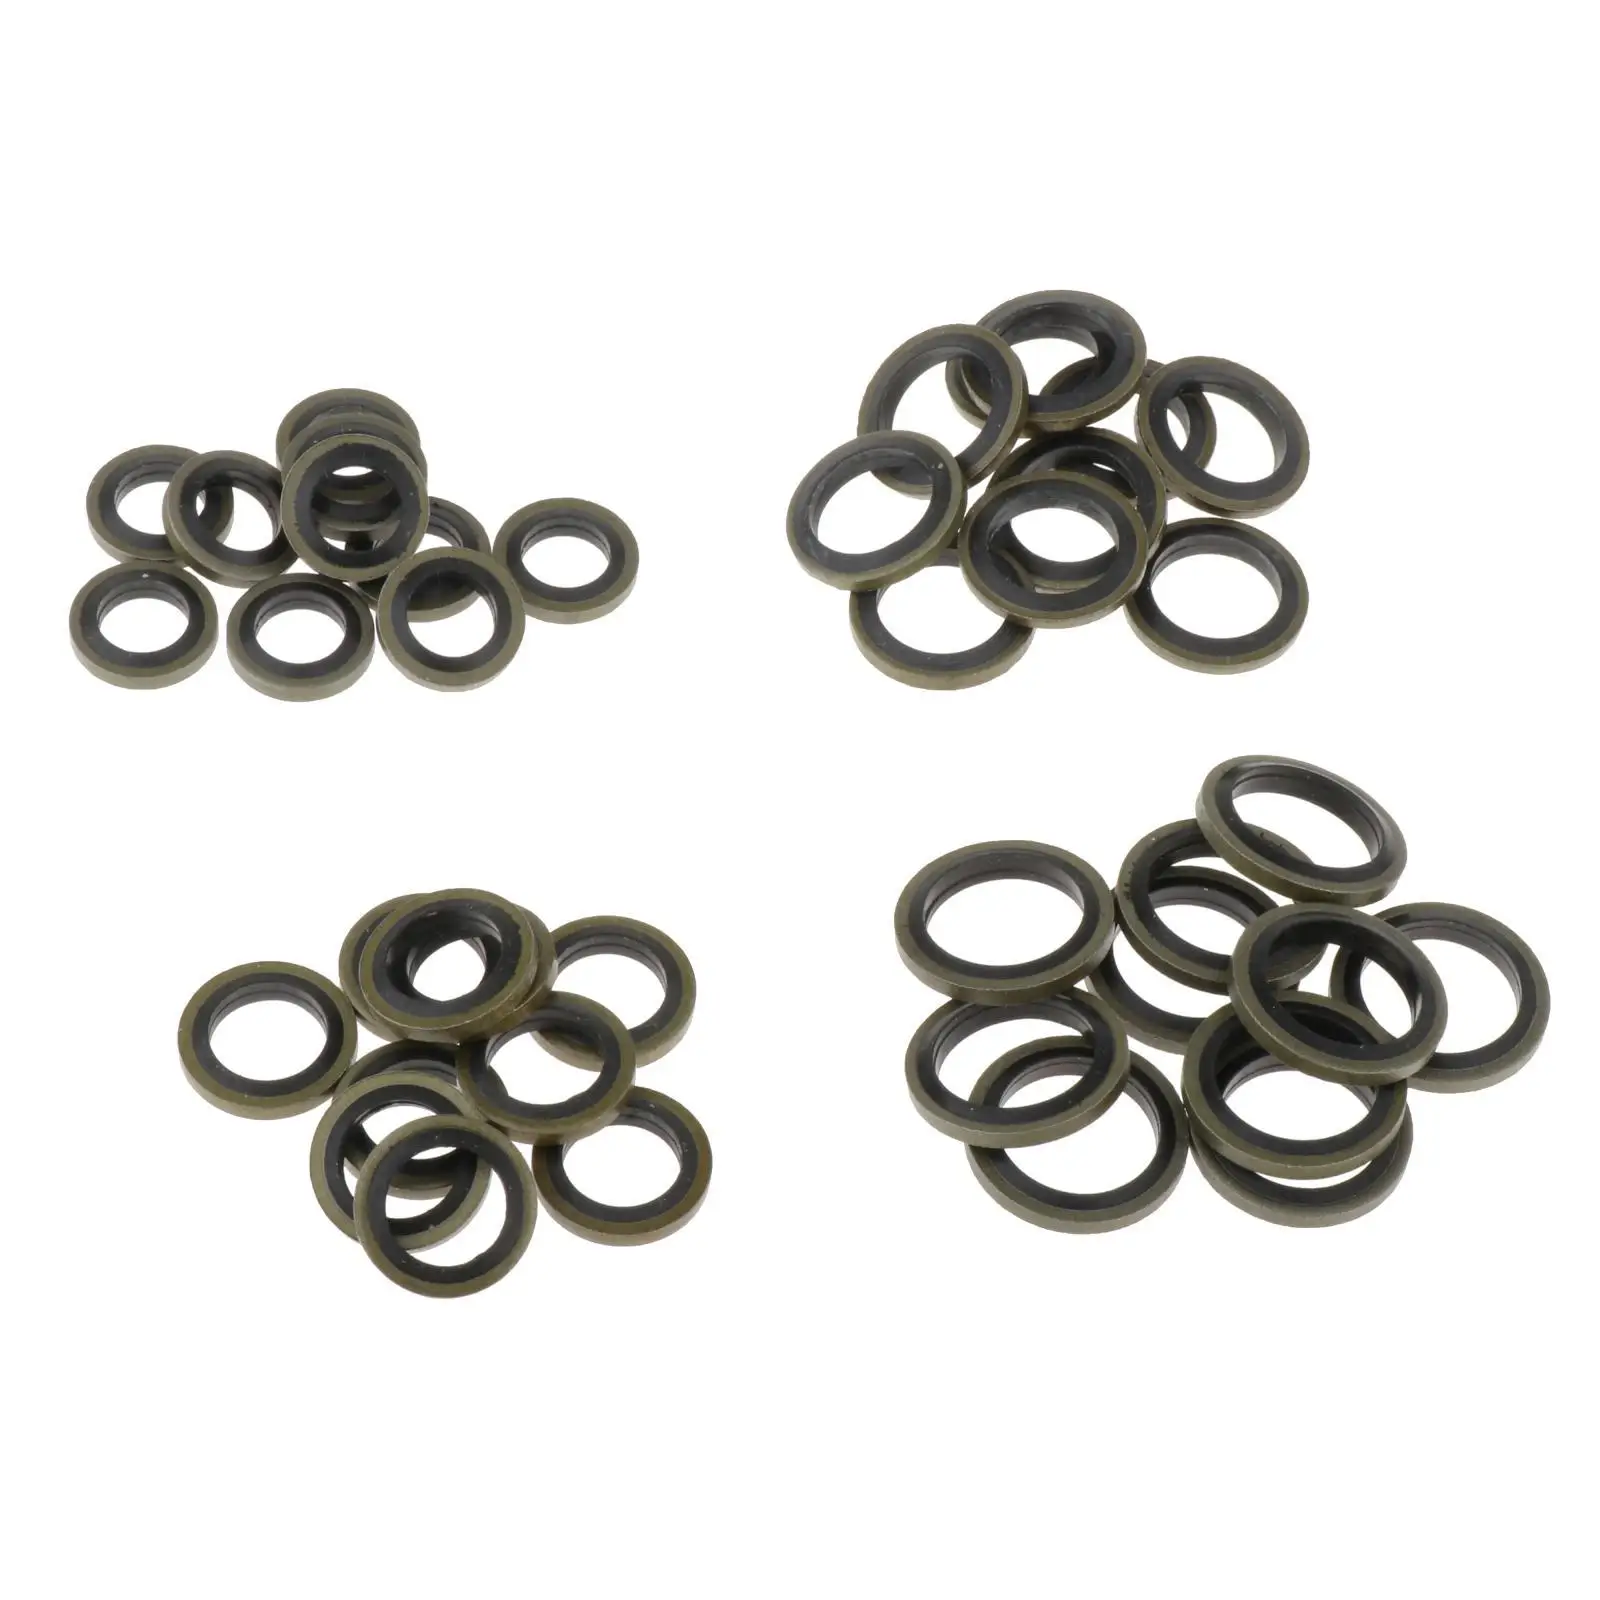 Bolt Fuel Sealing Washers Stable Washer Set for Automotive Replacement